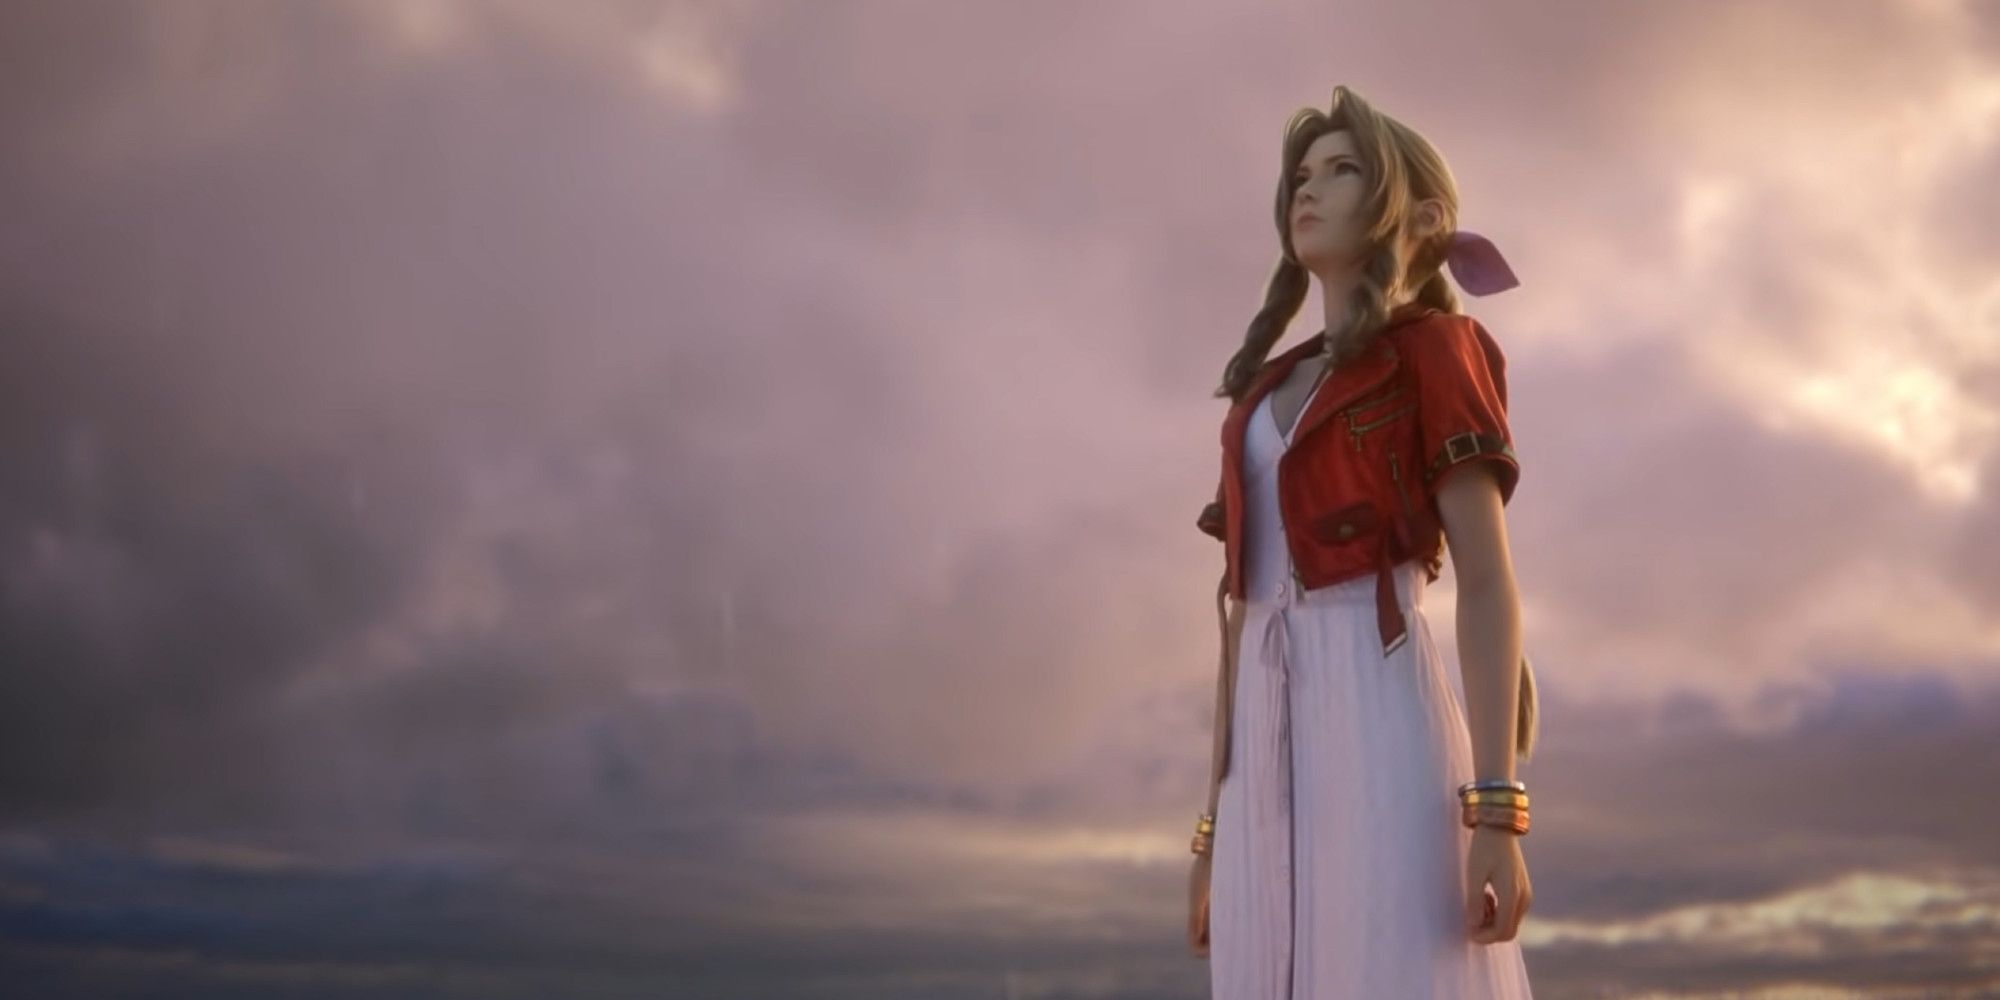 Aerith looking up at the clouds in Final Fantasy 7 Remake's ending